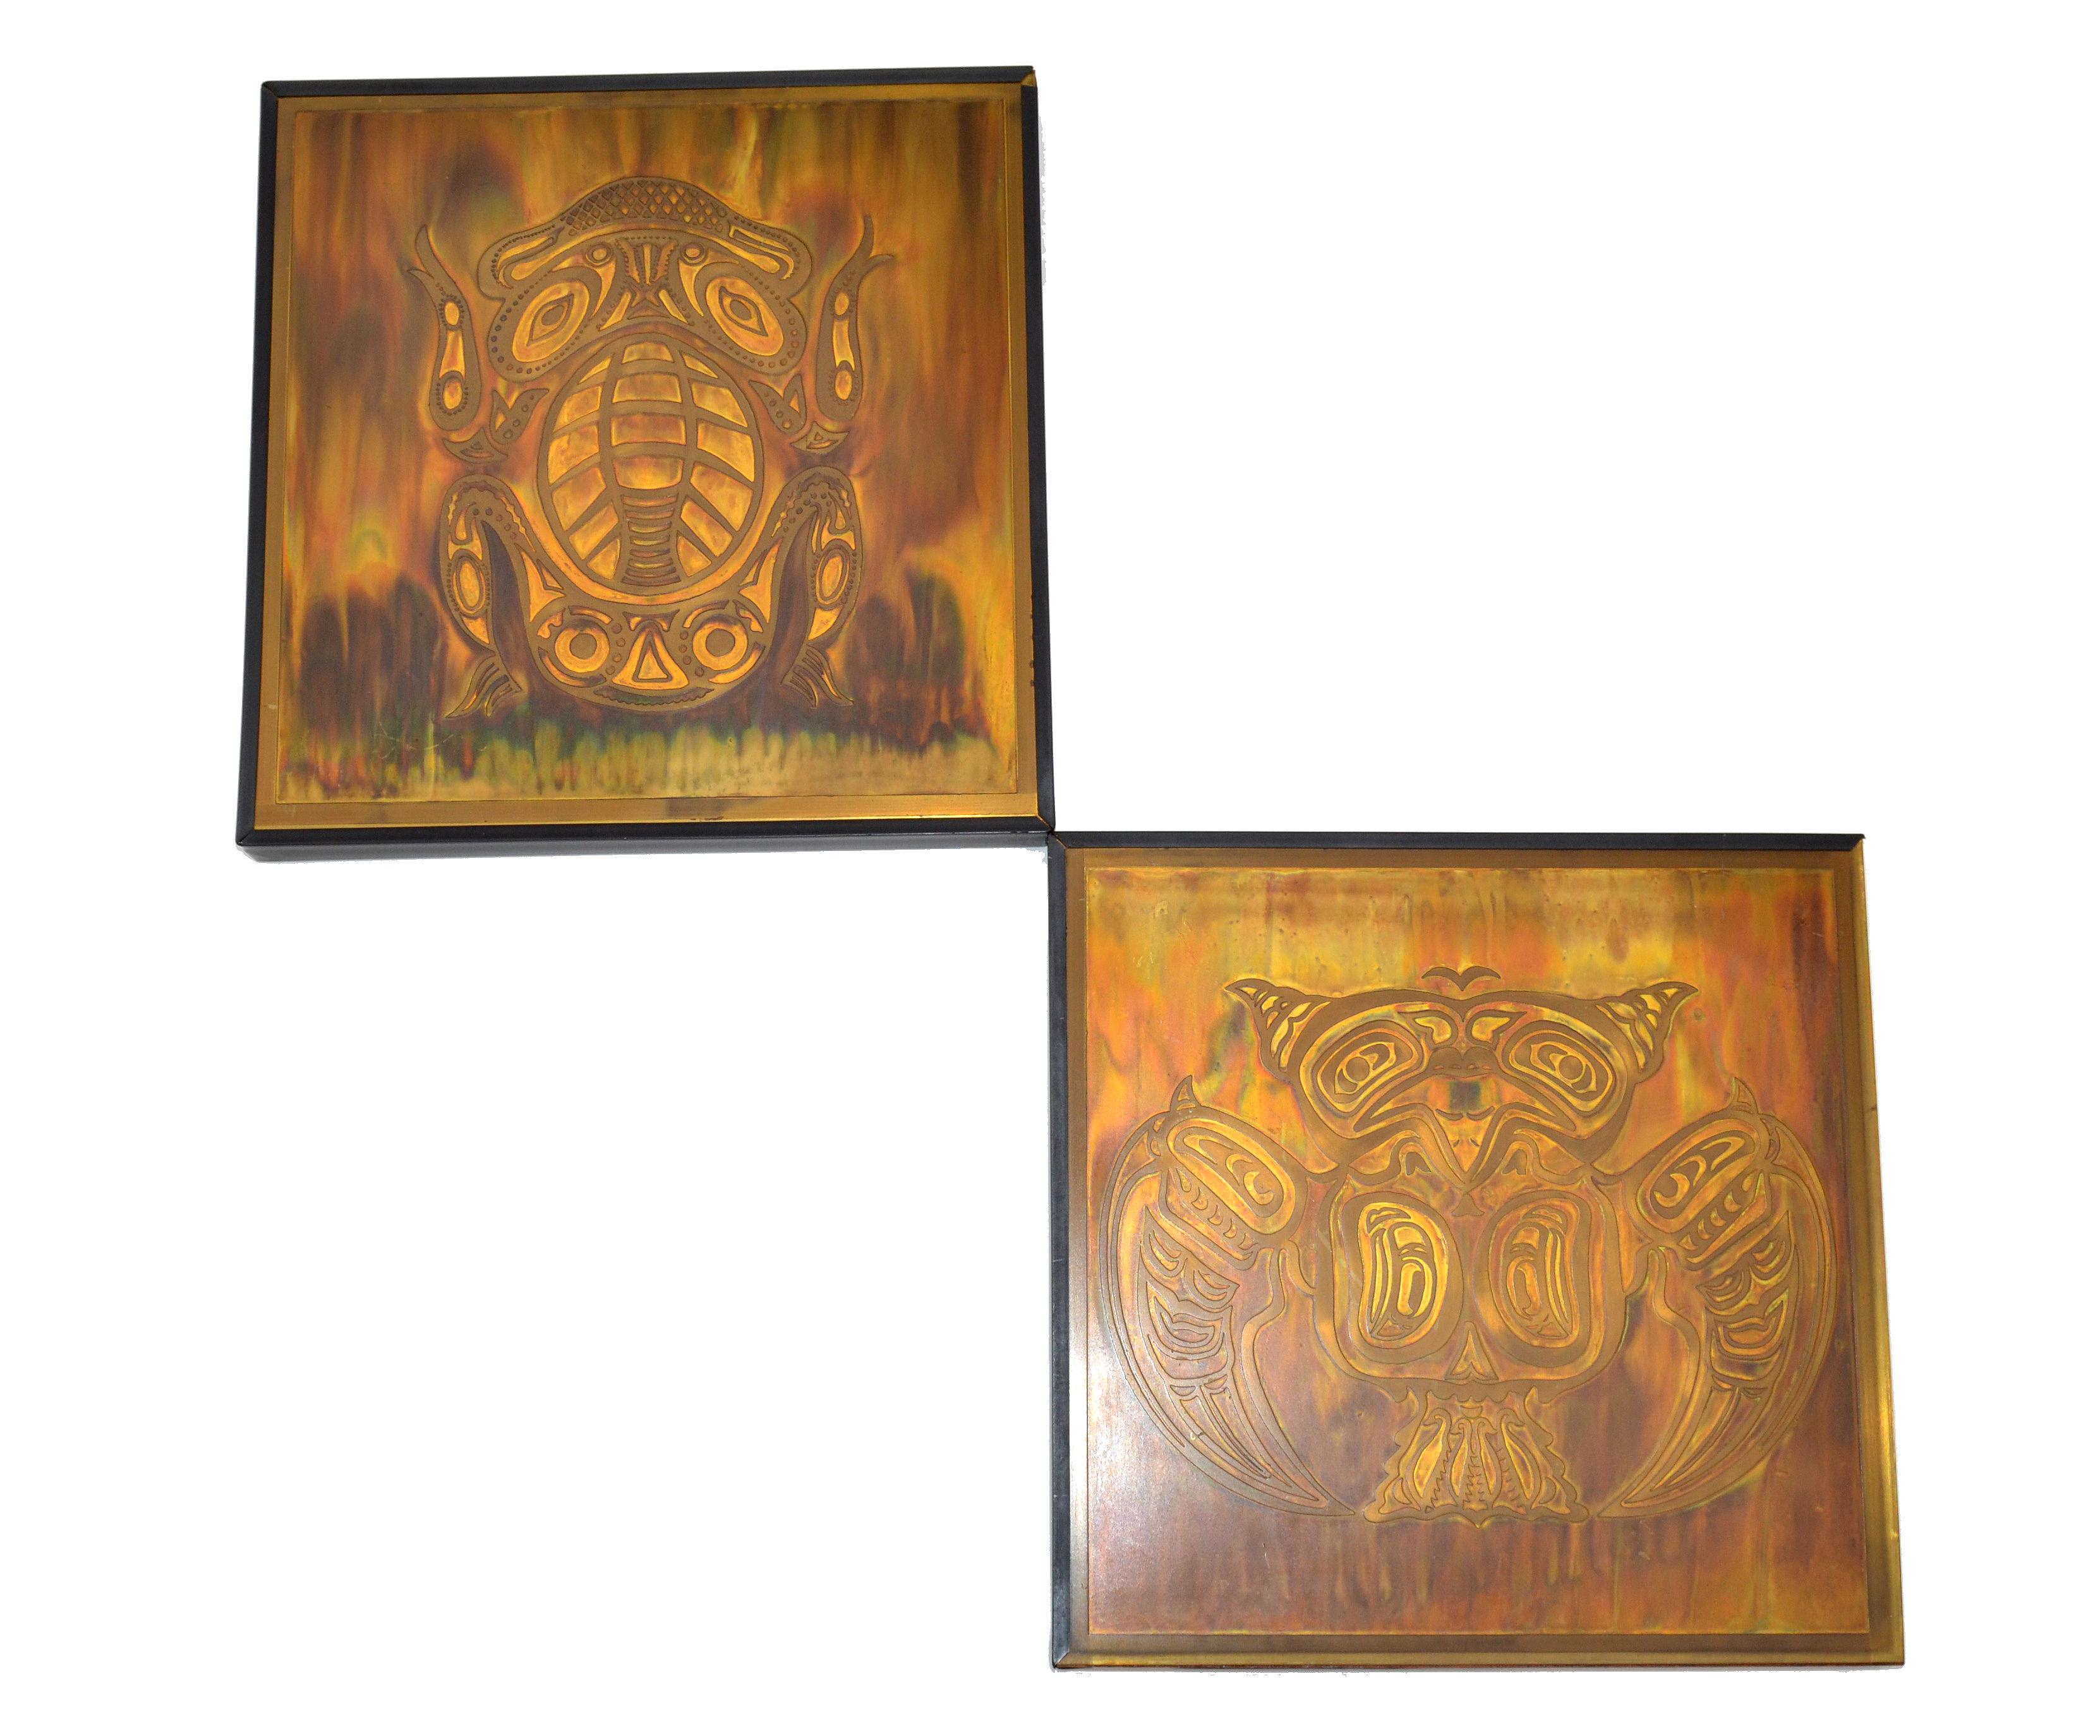 Here we offer 2 original vintage handcrafted acid etched brass metal owl and frog art pieces.
Both are framed and have the original paper back label with the Models on the reverse.
The frog is the symbol of prosperity and the owl is symbol of the